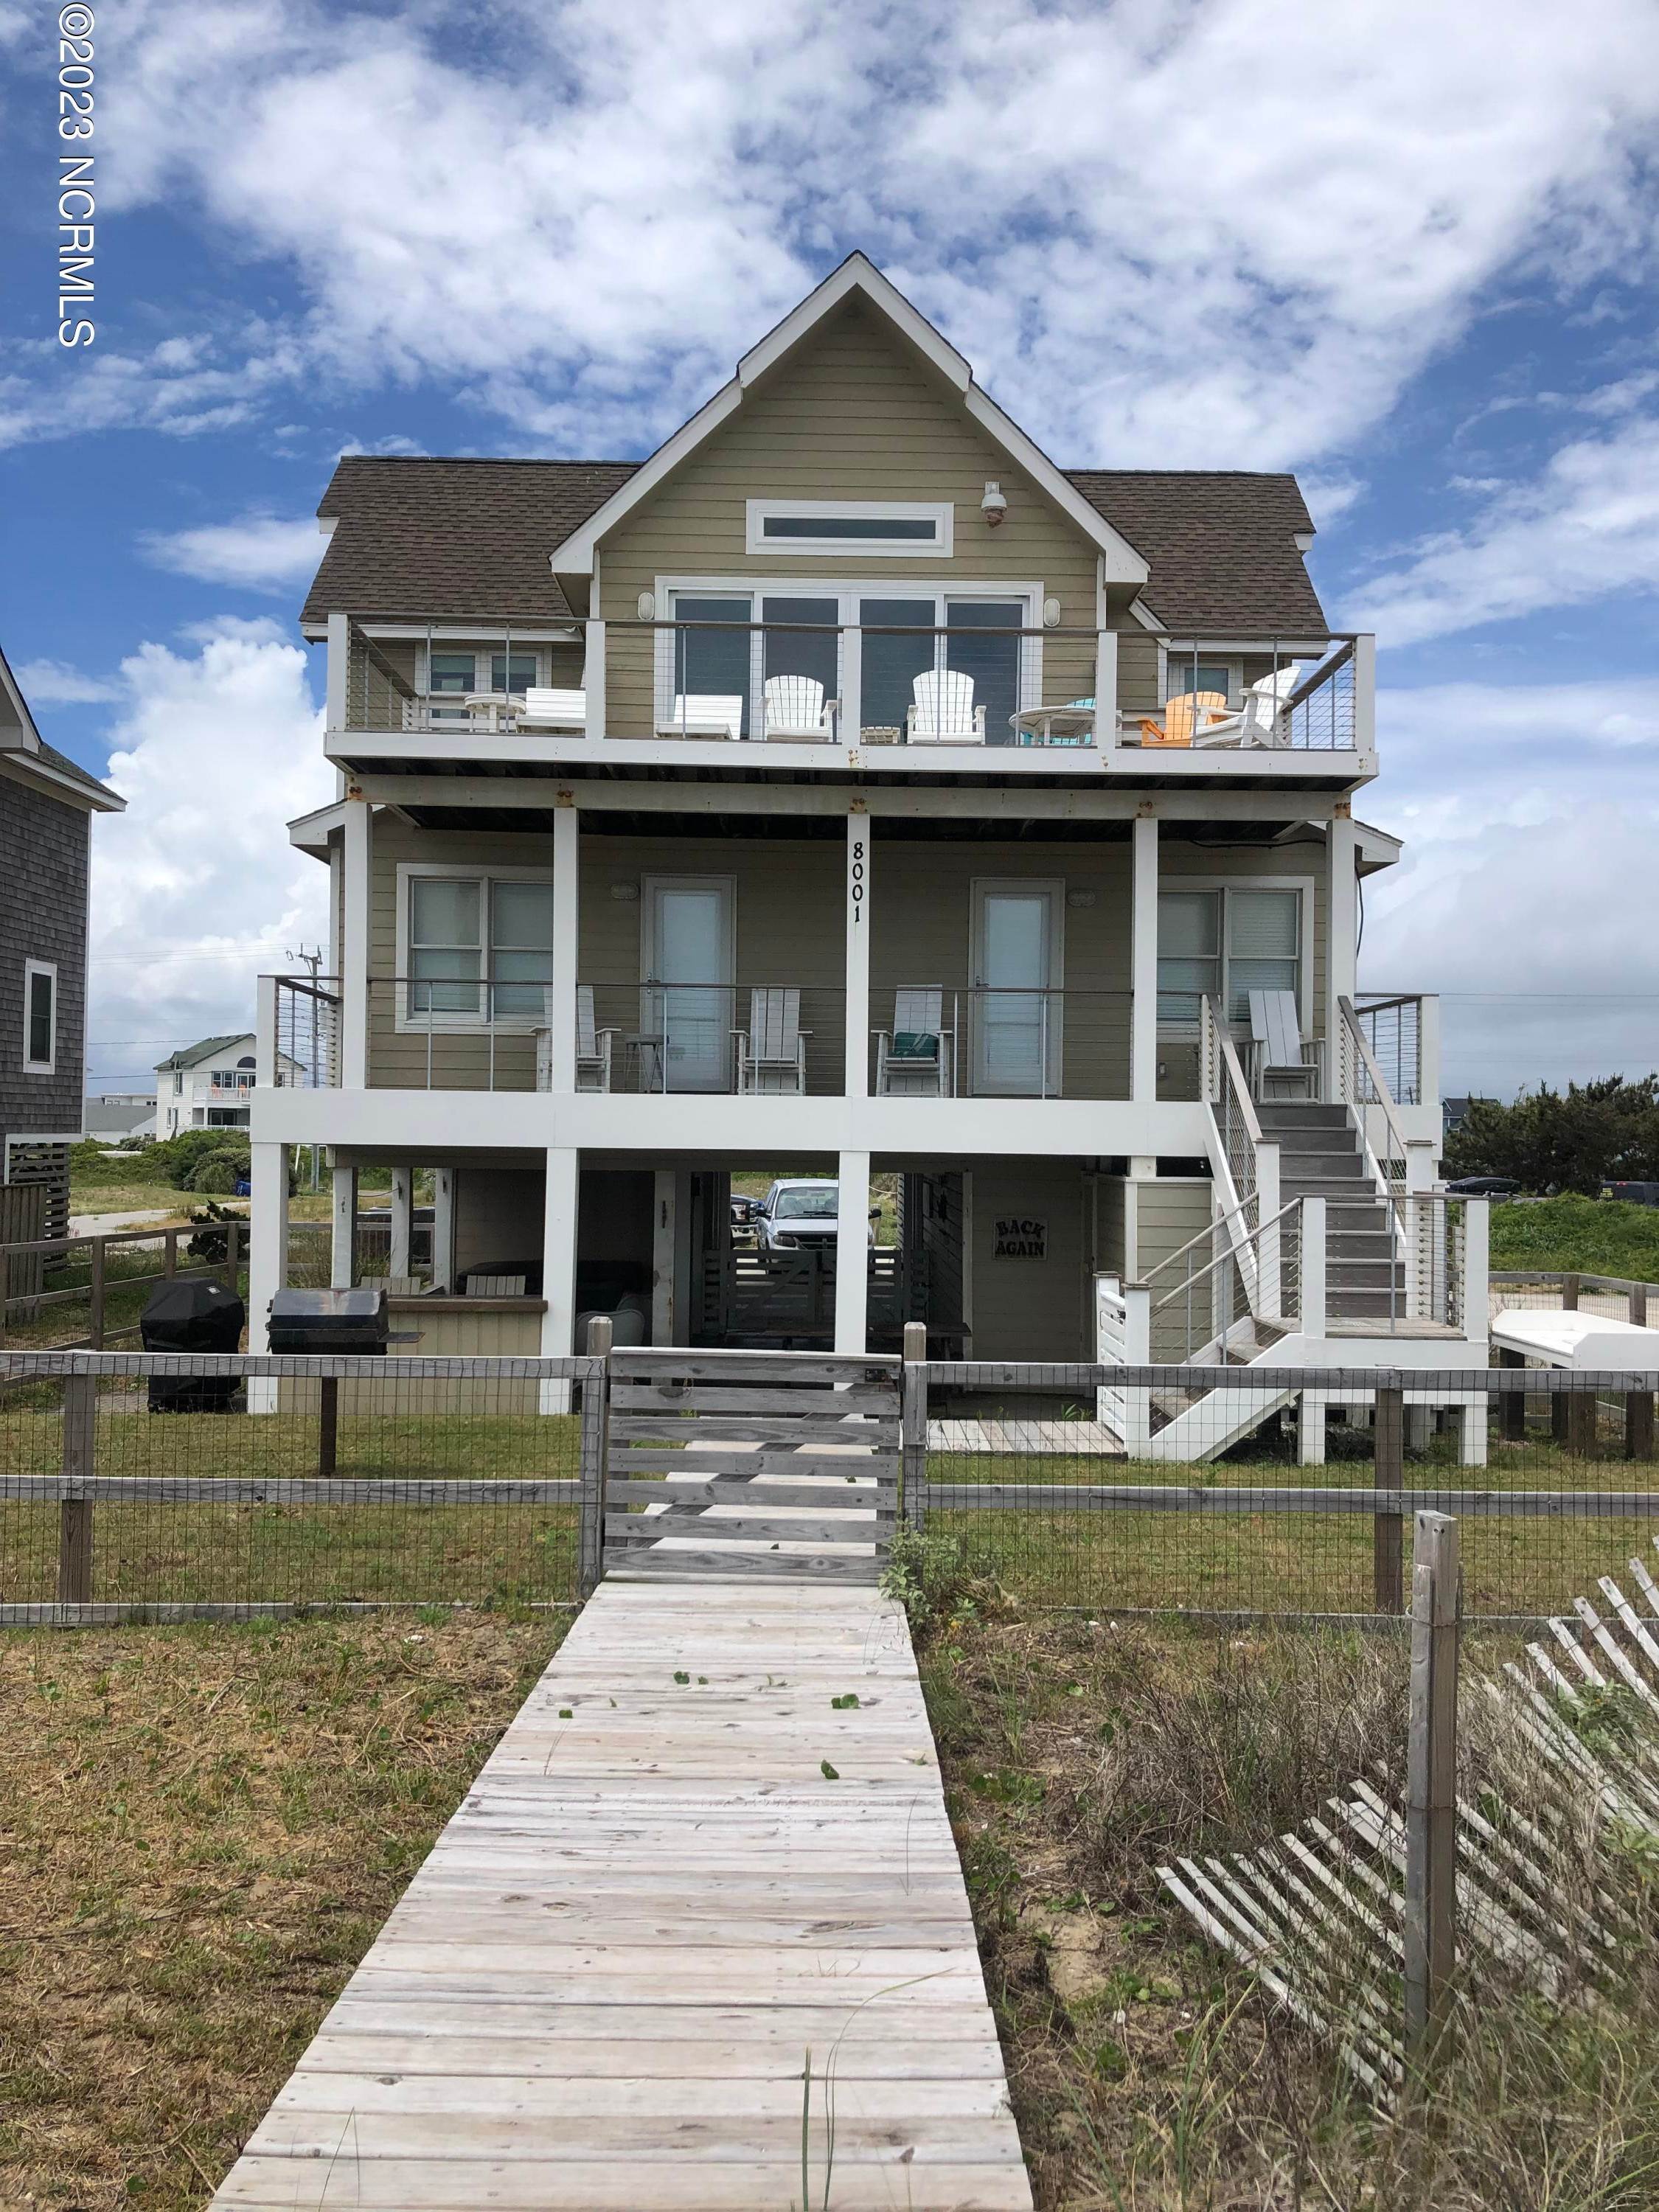 Single Family Homes for Sale at 8001 Old Oregon Inlet Road Nags Head, North Carolina 27959 United States